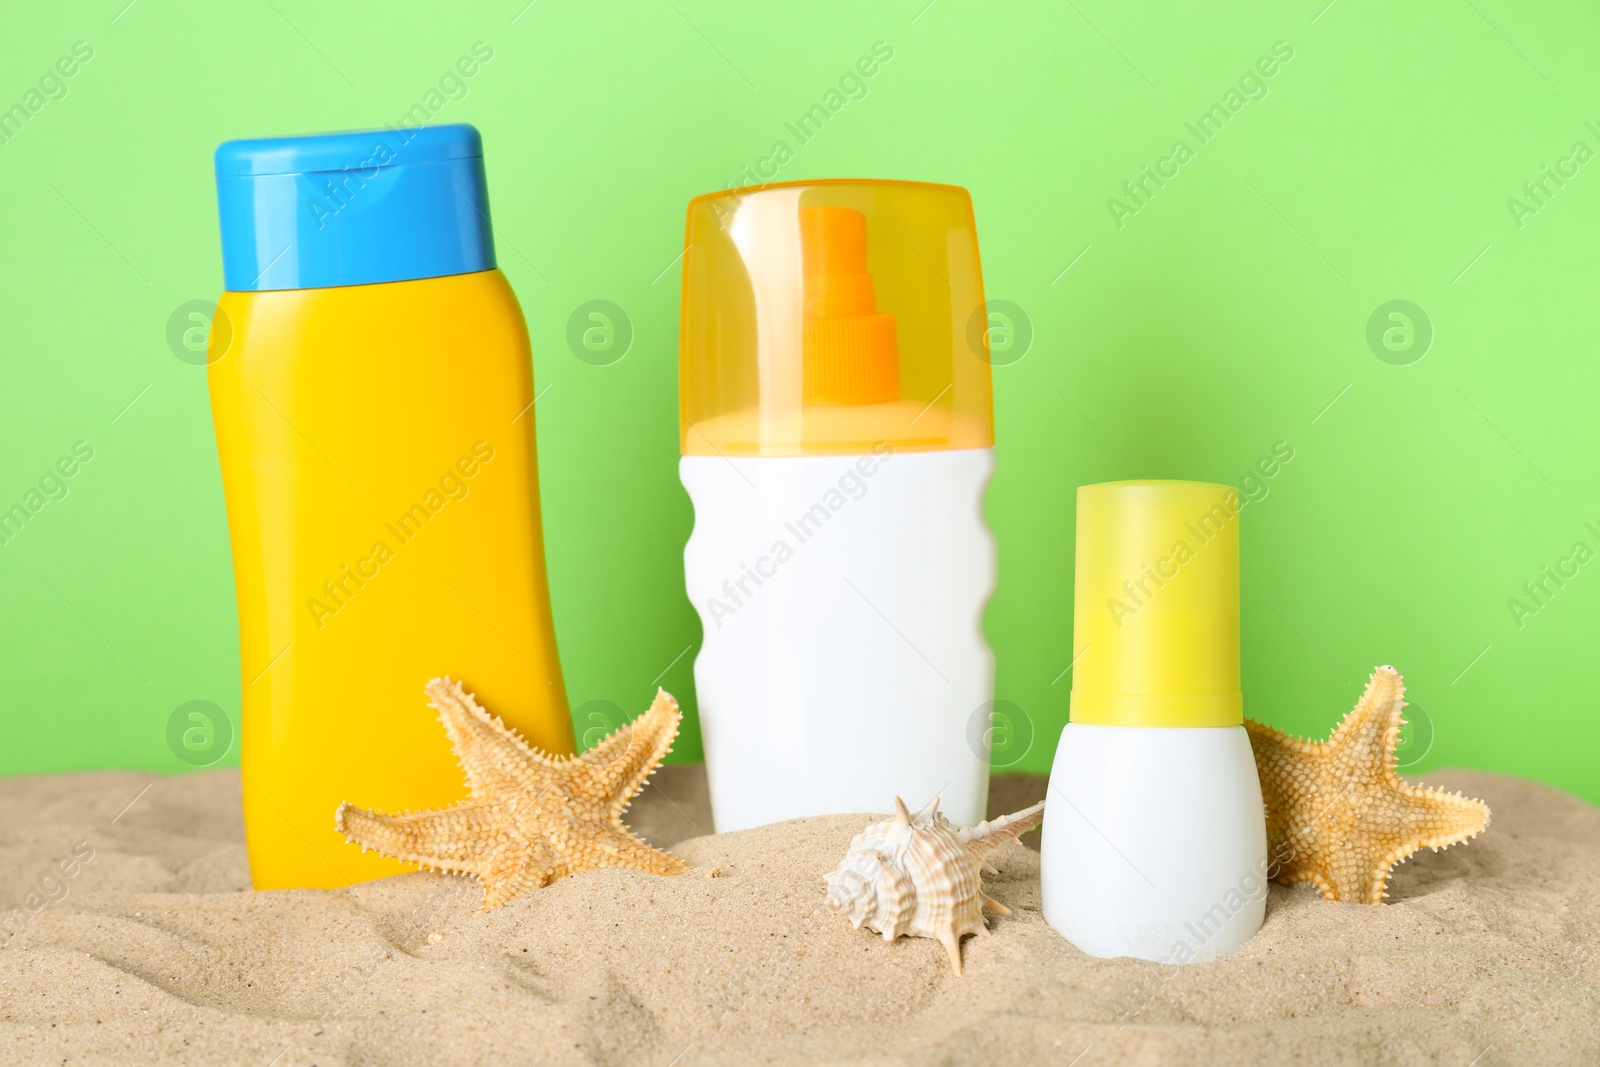 Photo of Different suntan products, seashell and starfishes on sand against green background